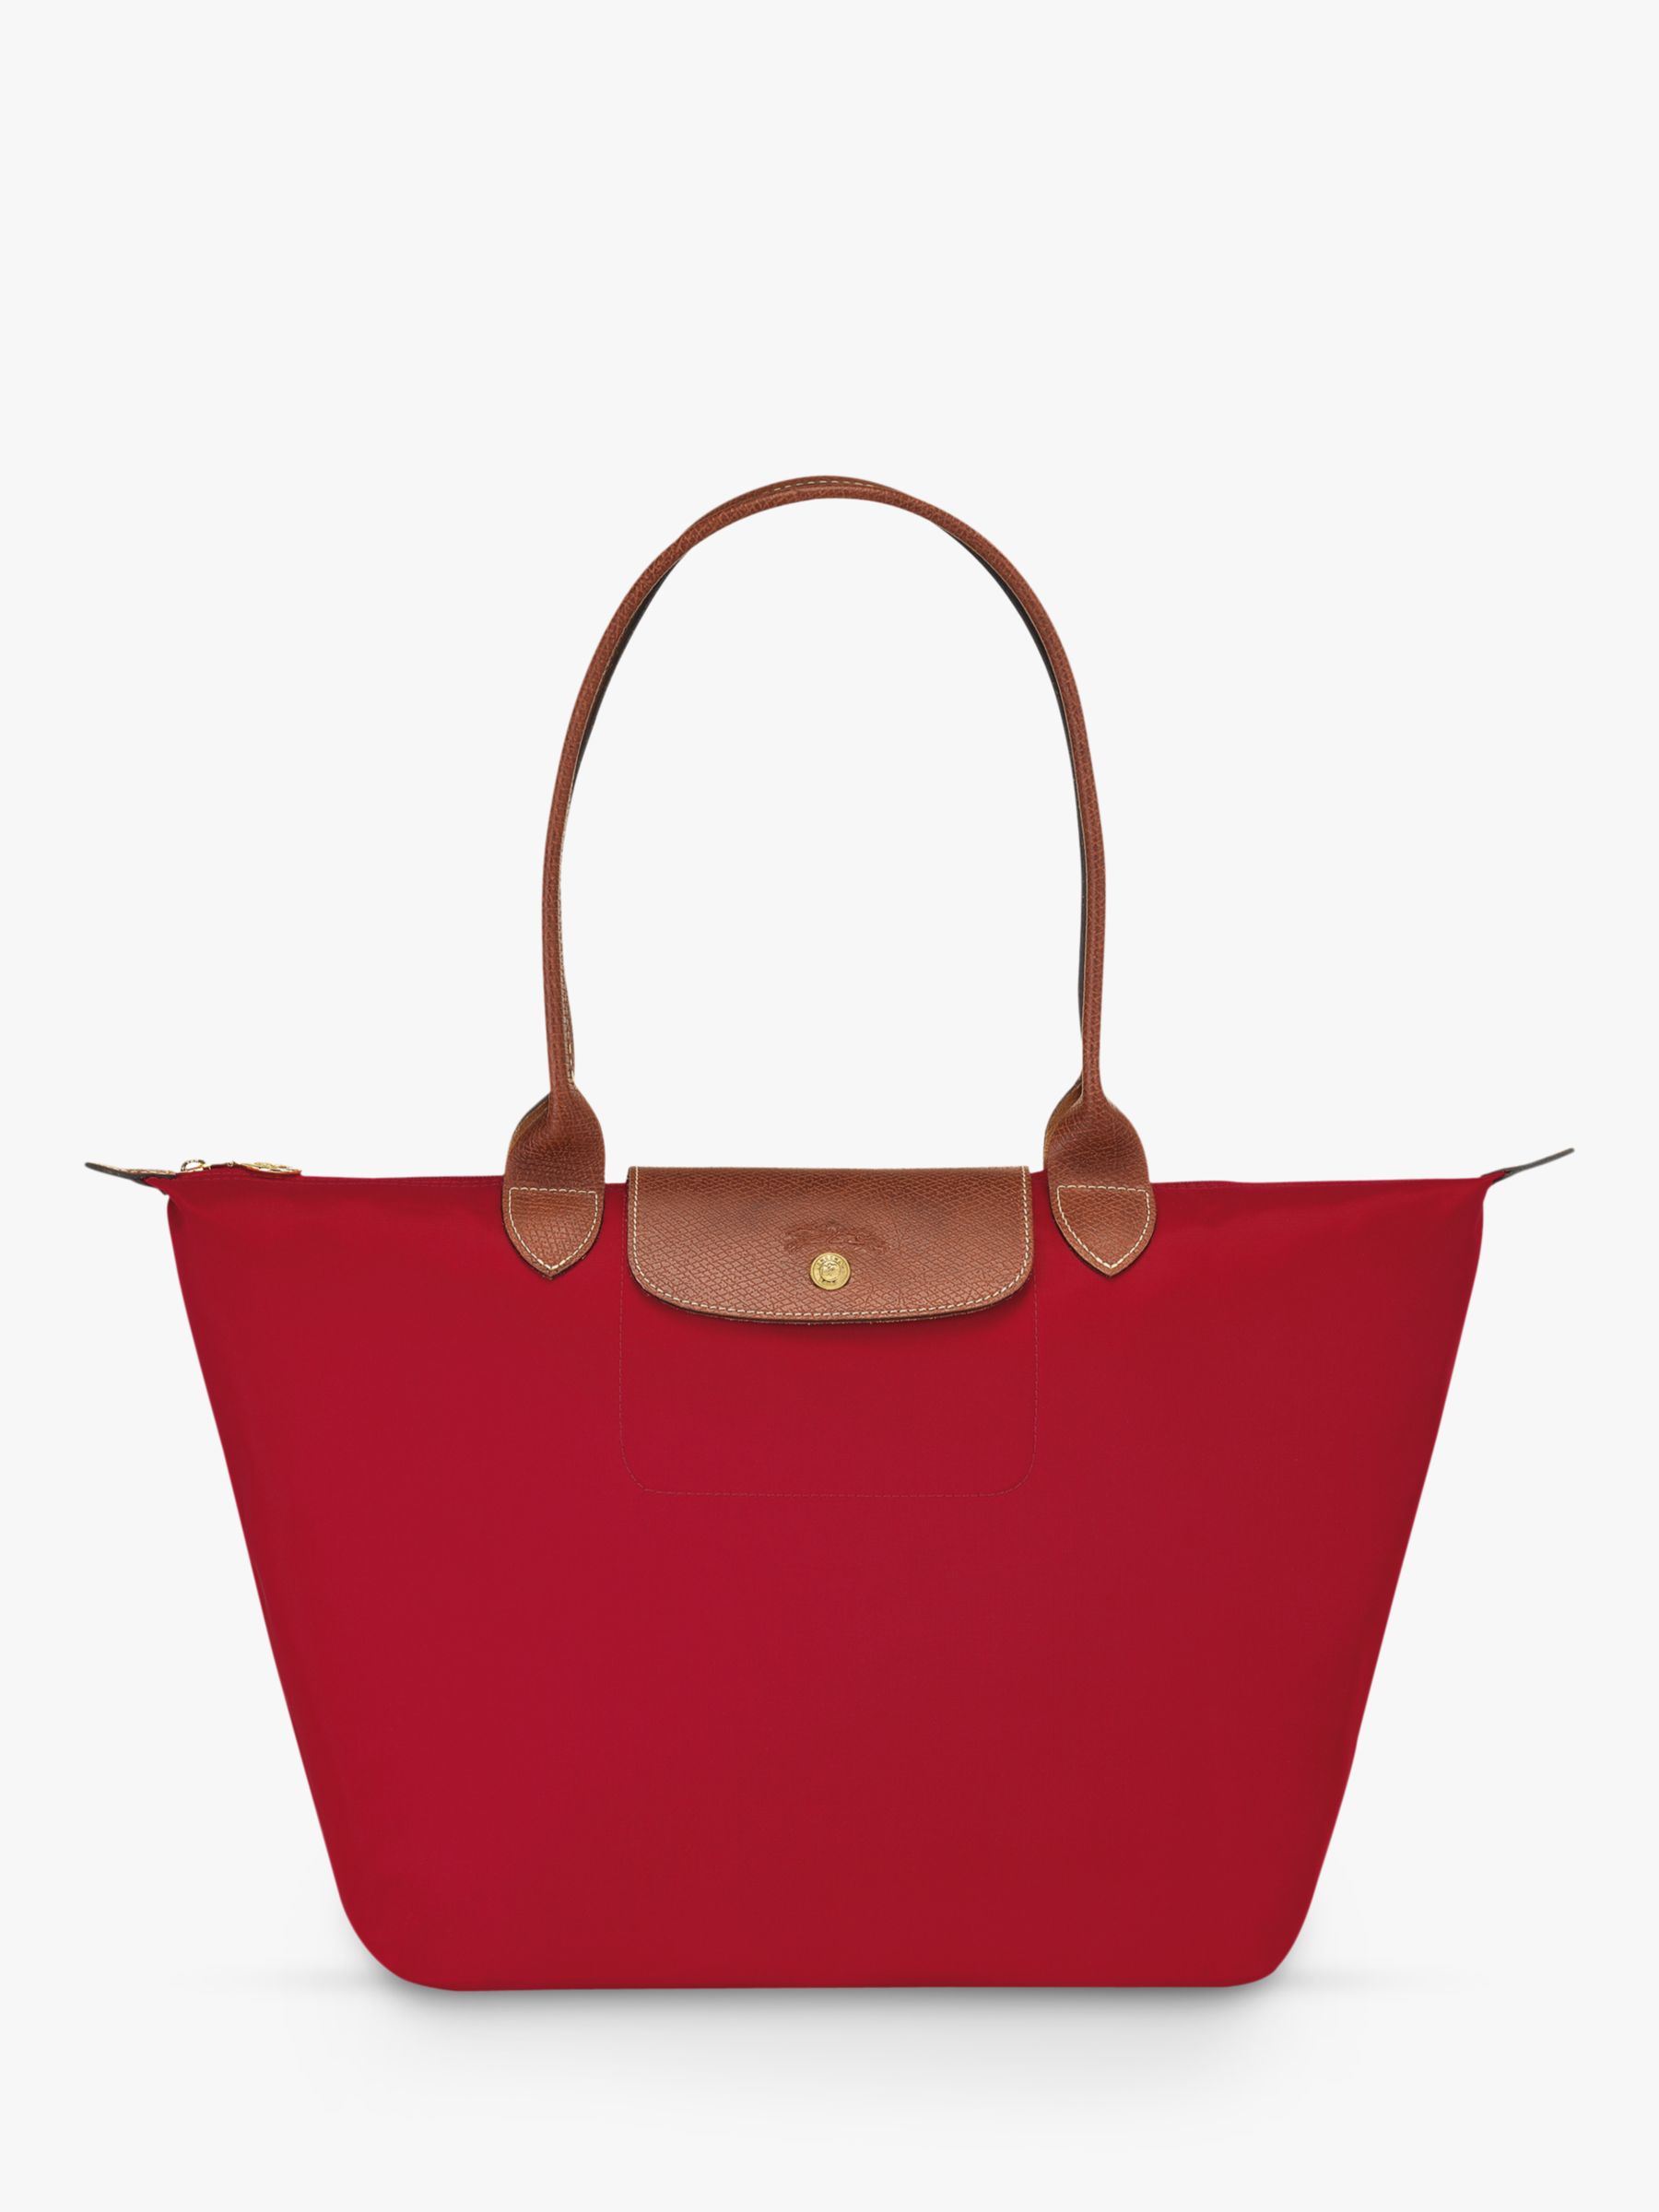 where to buy longchamps bags on sale